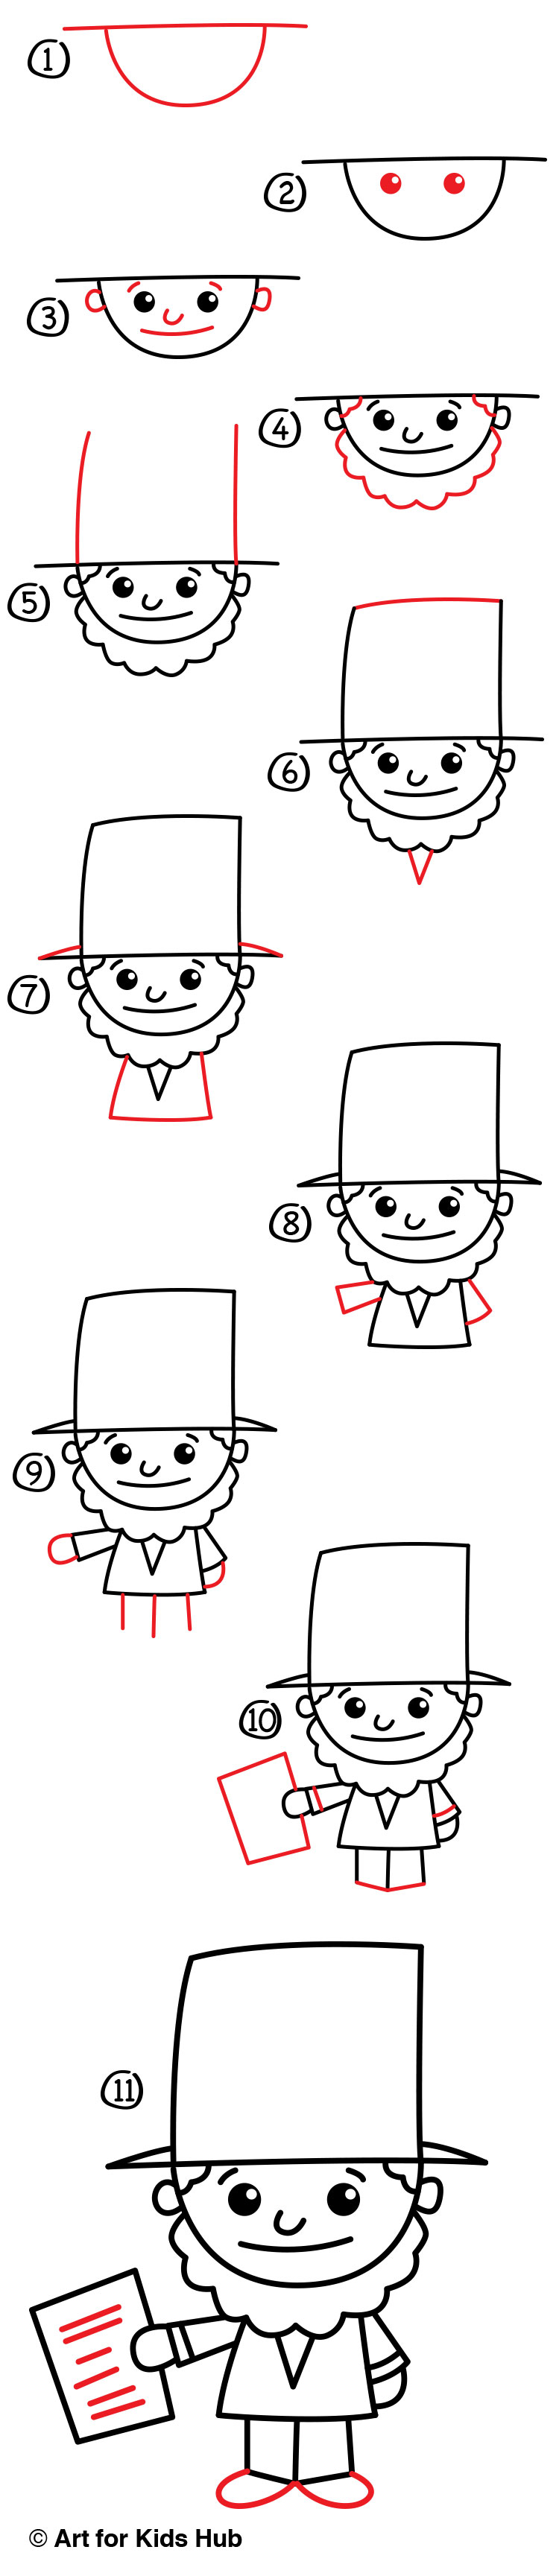 How To Draw A Cartoon Abraham Lincoln - Art For Kids Hub